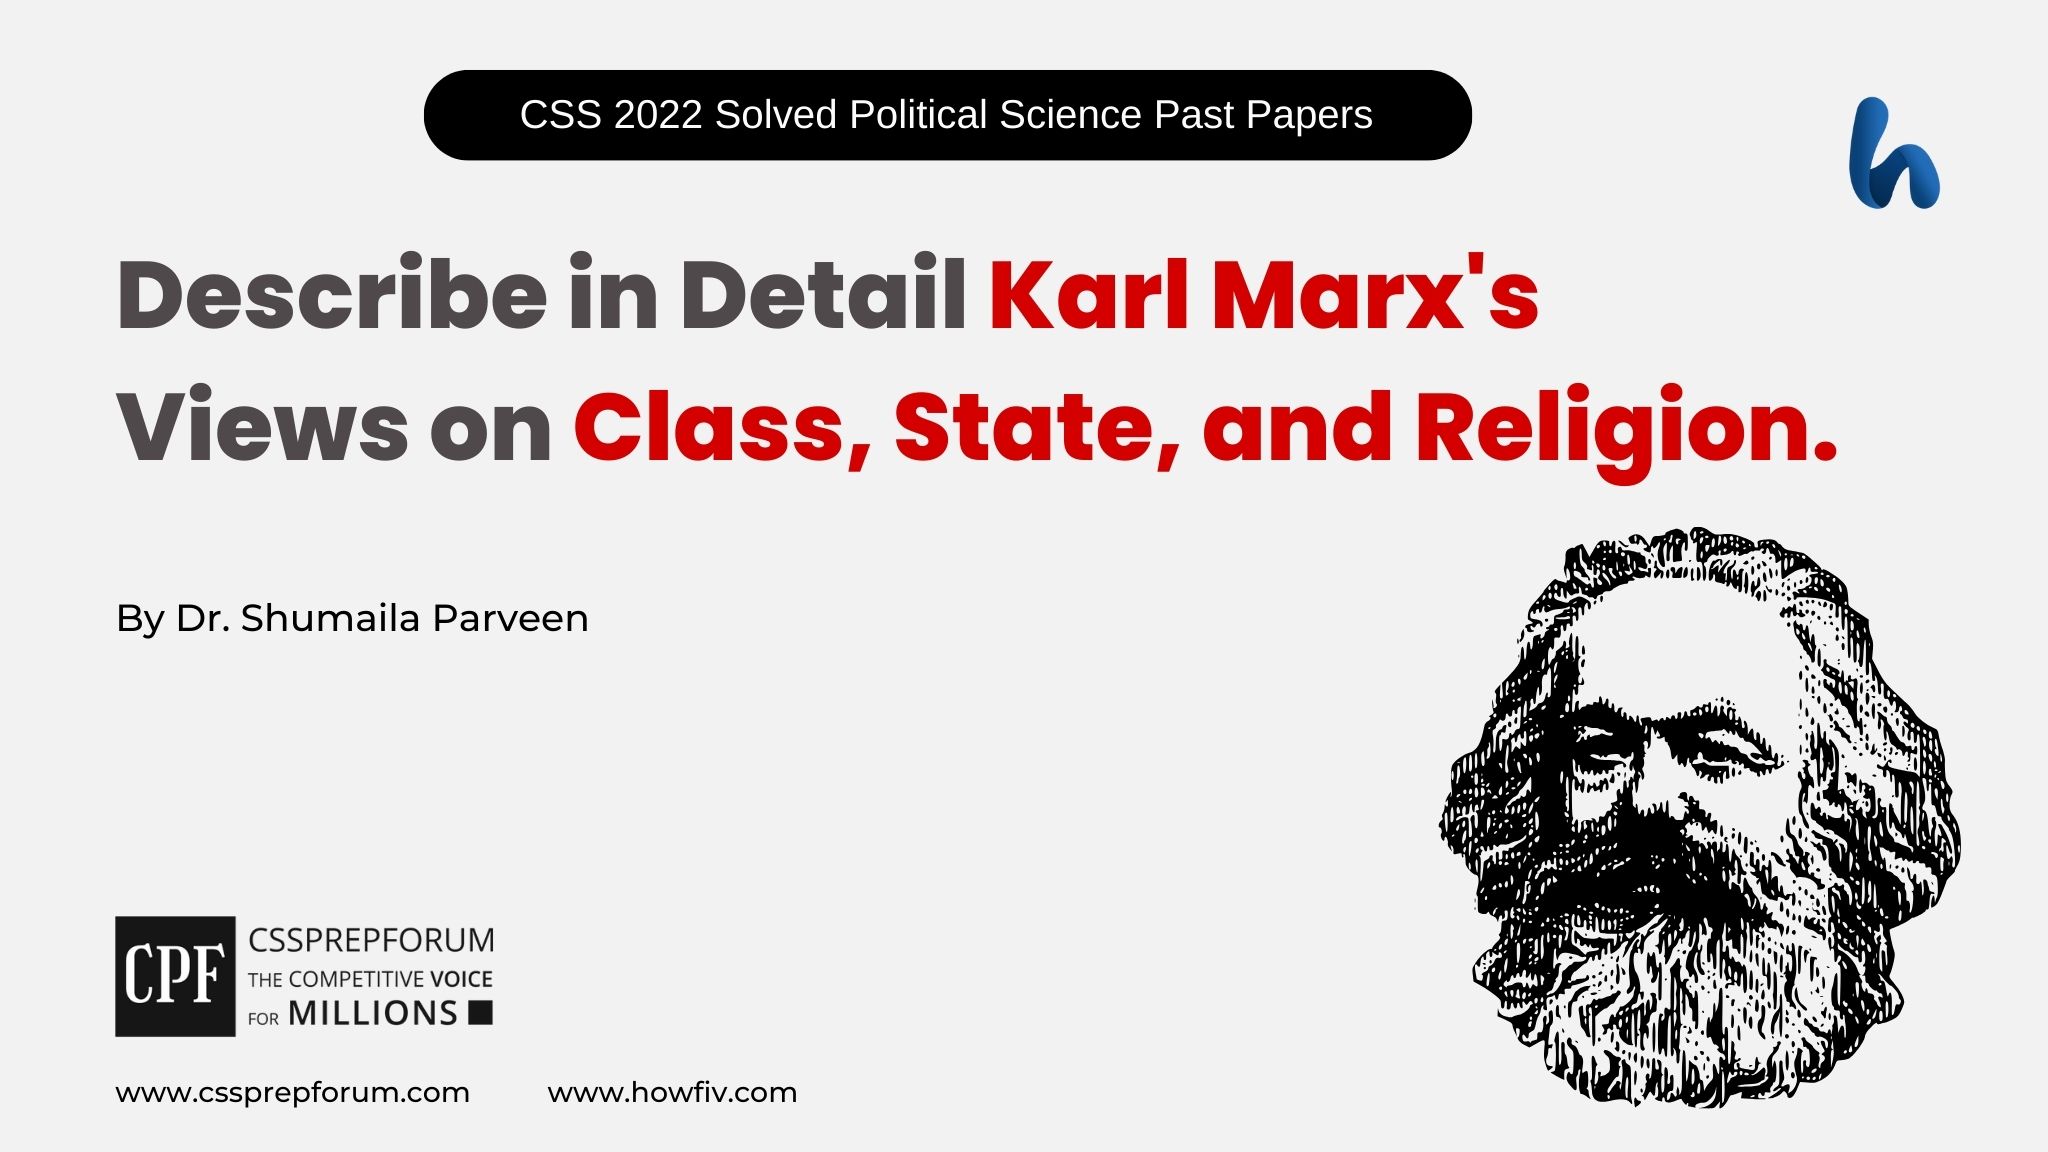 Karl Marx's views on class, state, and religion by Dr. Shumaila Parveen